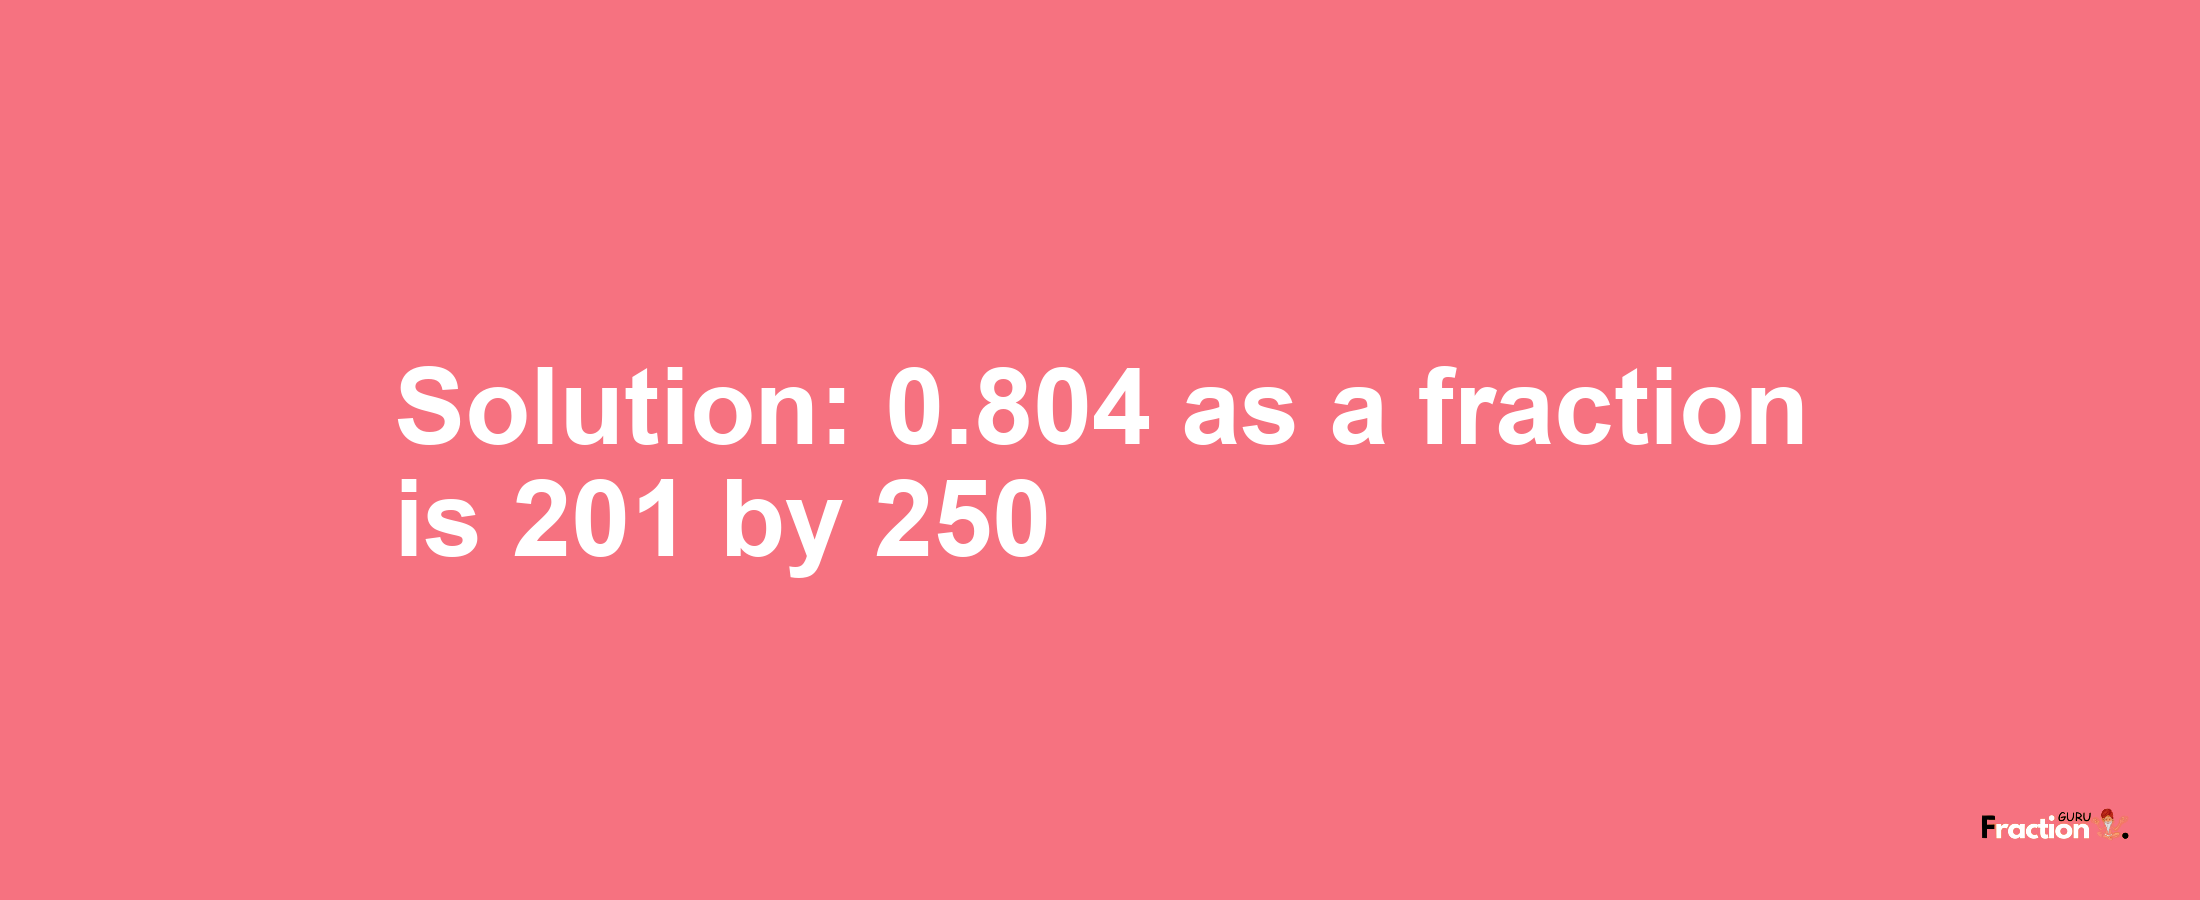 Solution:0.804 as a fraction is 201/250